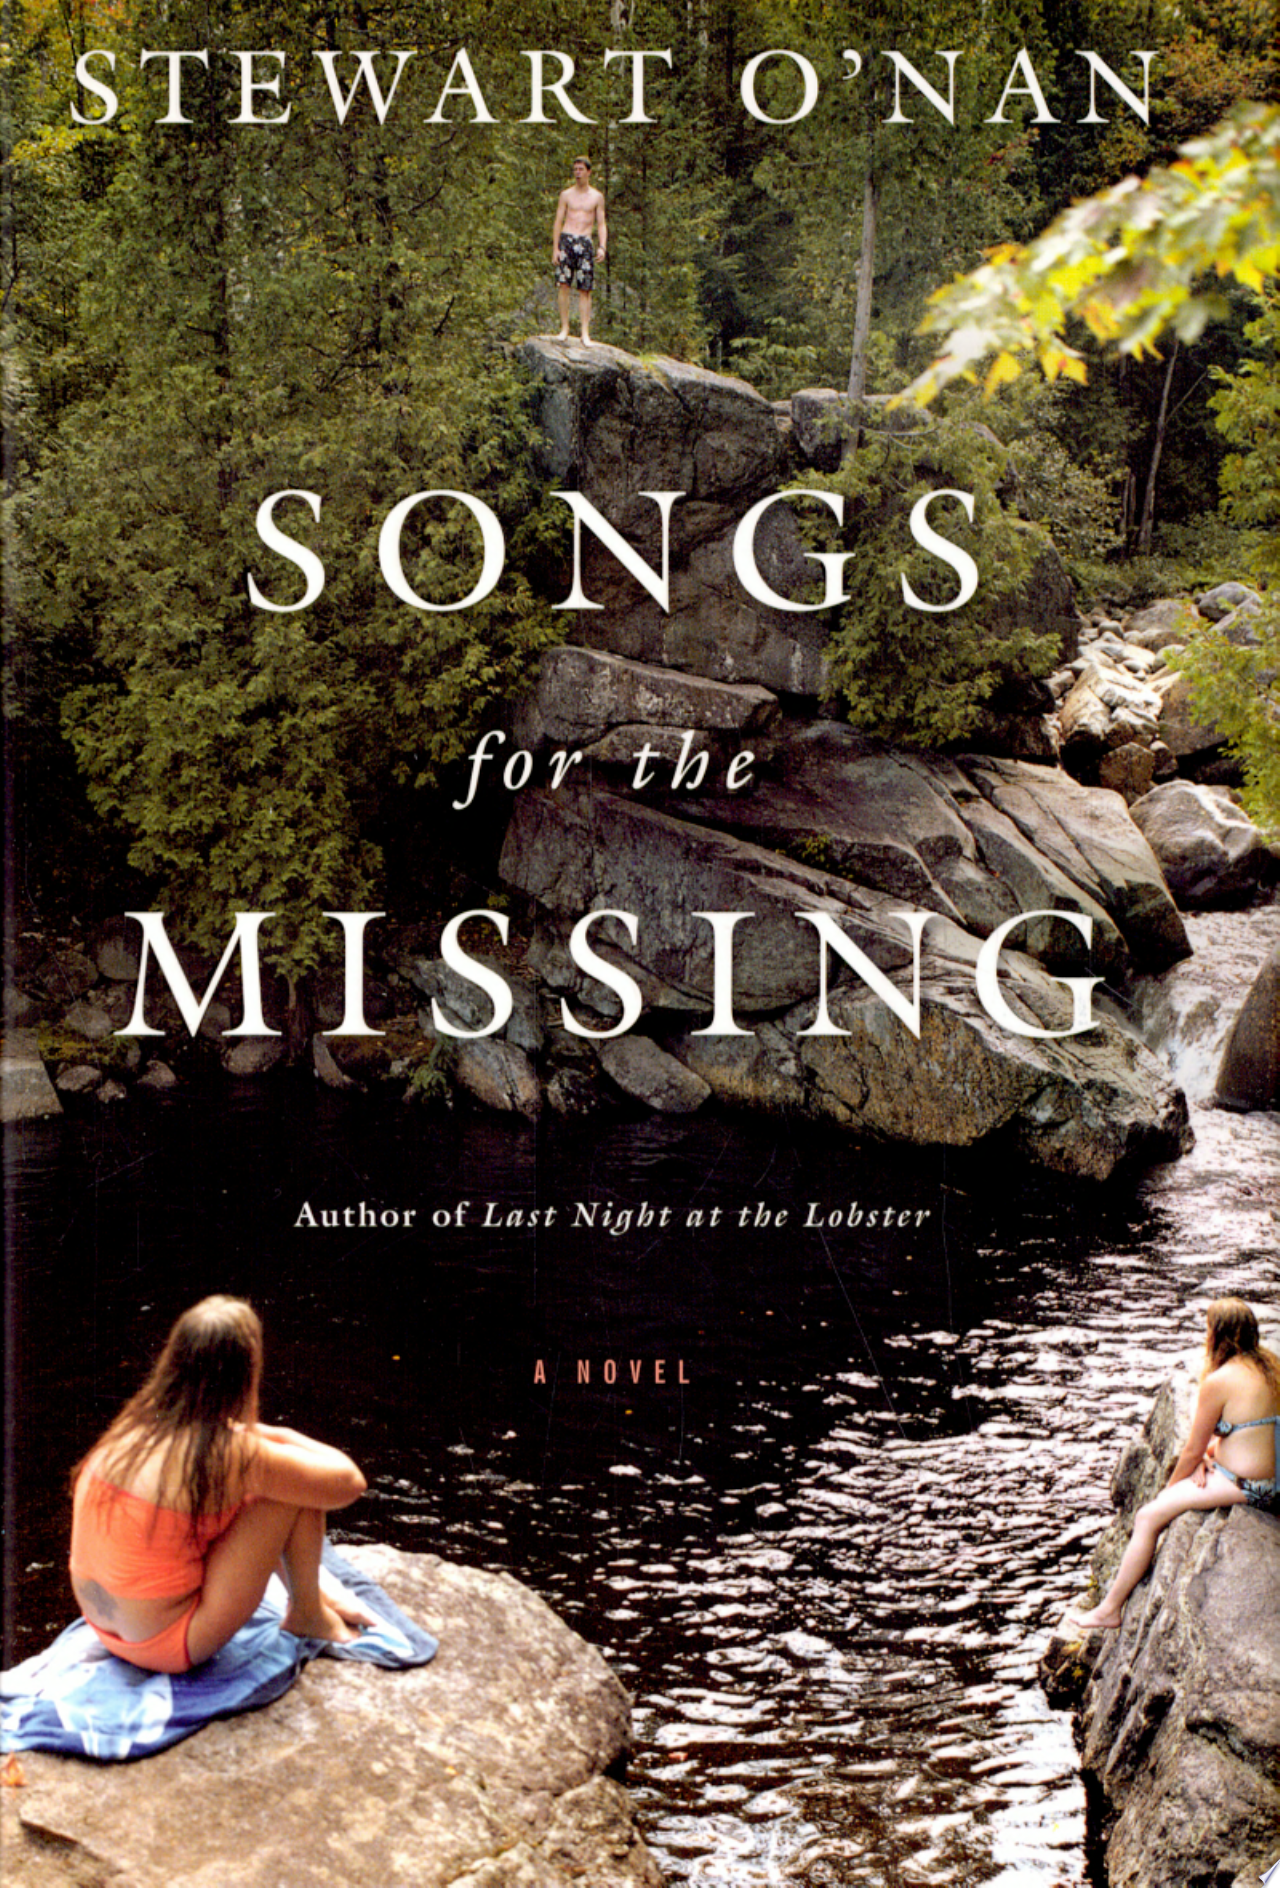 Image for "Songs for the Missing"